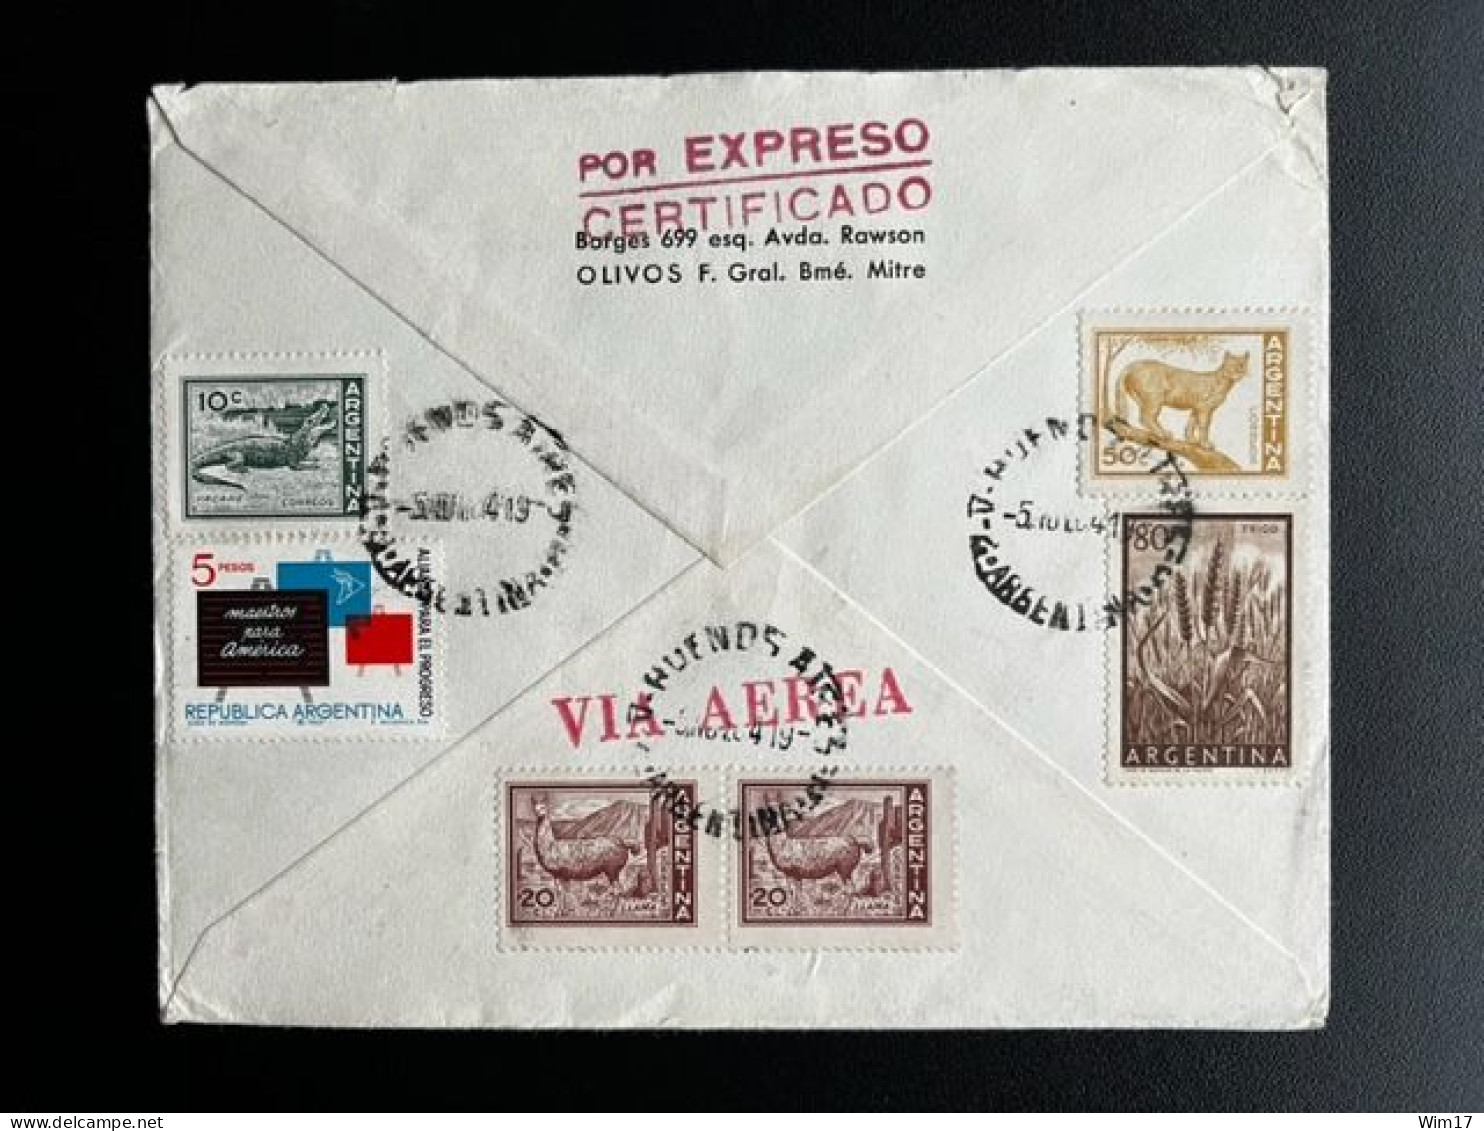 ARGENTINA 1964 REGISTERED EXPRESS AIR MAIL LETTER BUENOS AIRES TO WINTERMOOR 05-11-1964 CERTIFICADO EXPRESO - Covers & Documents